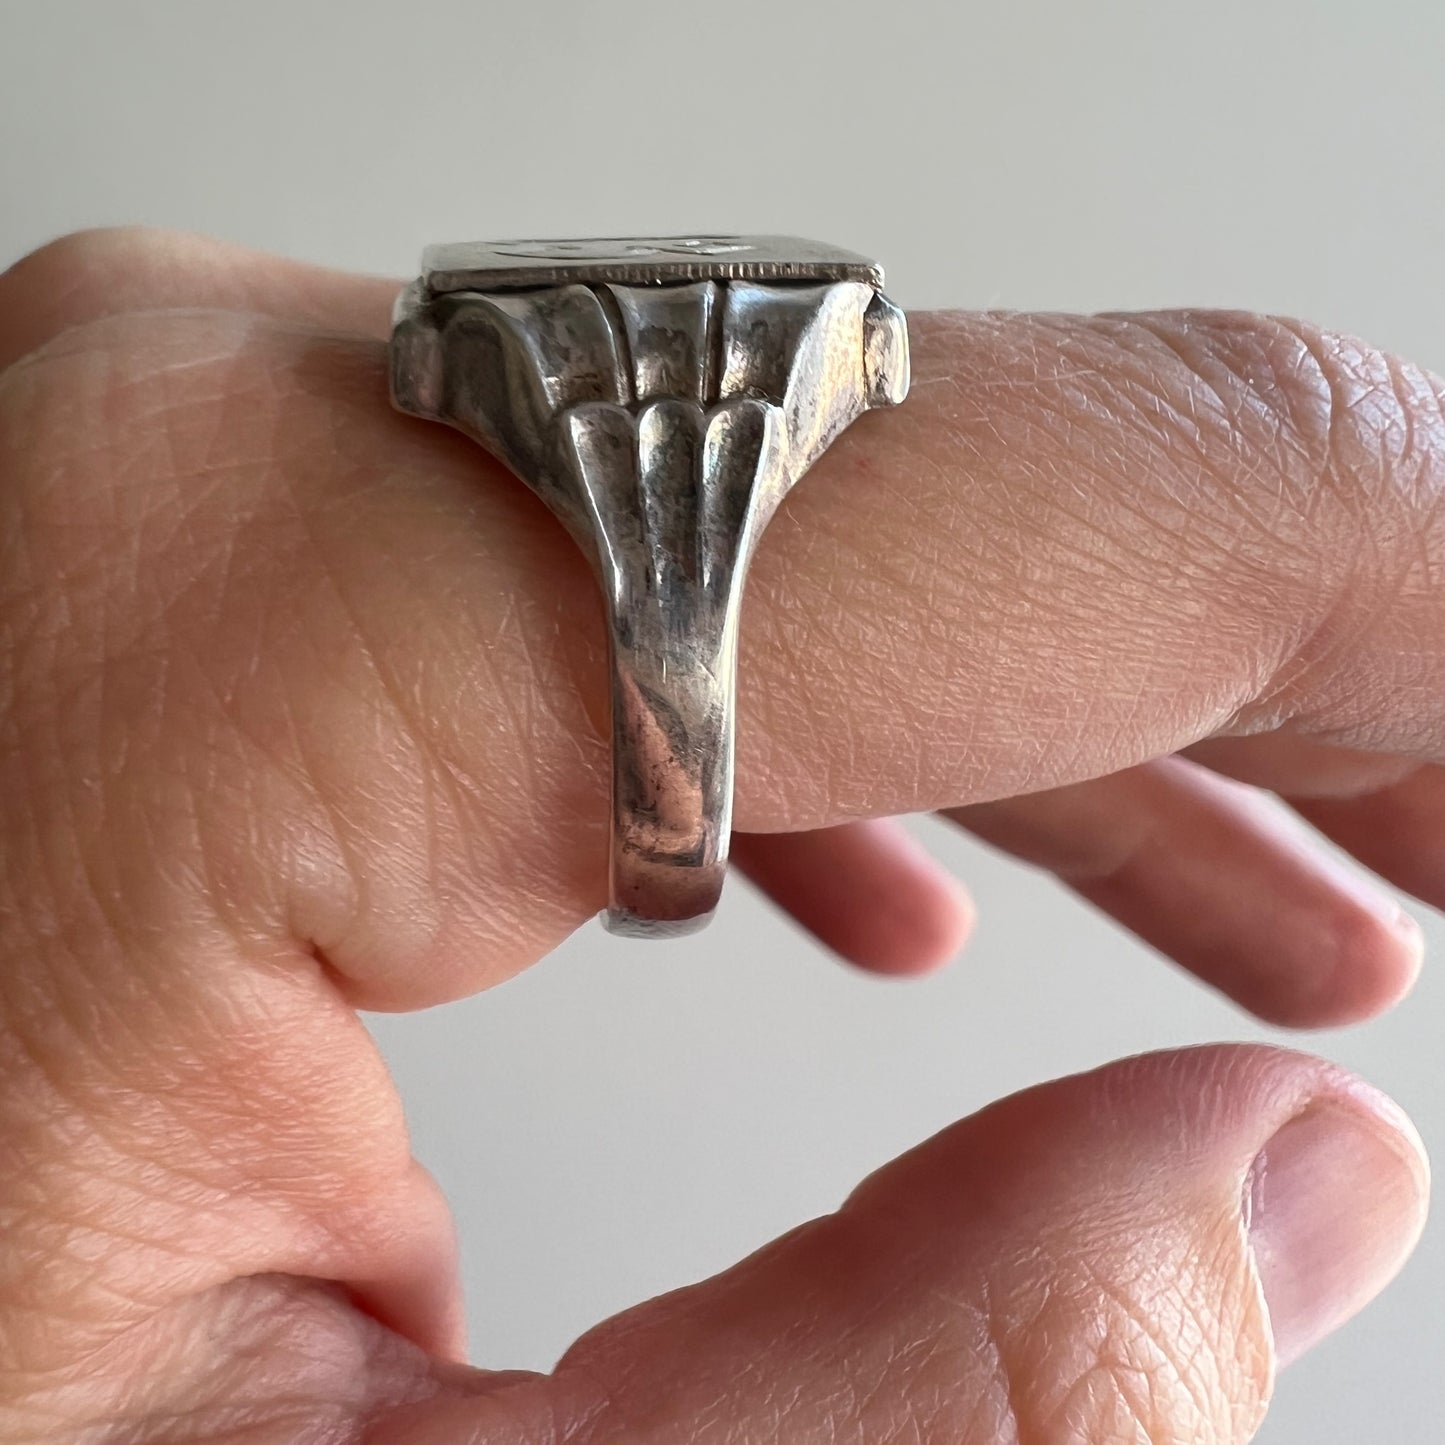 reimagined V I N T A G E // lucky 13 / 800 silver signet ring with new engraving / size 10.75